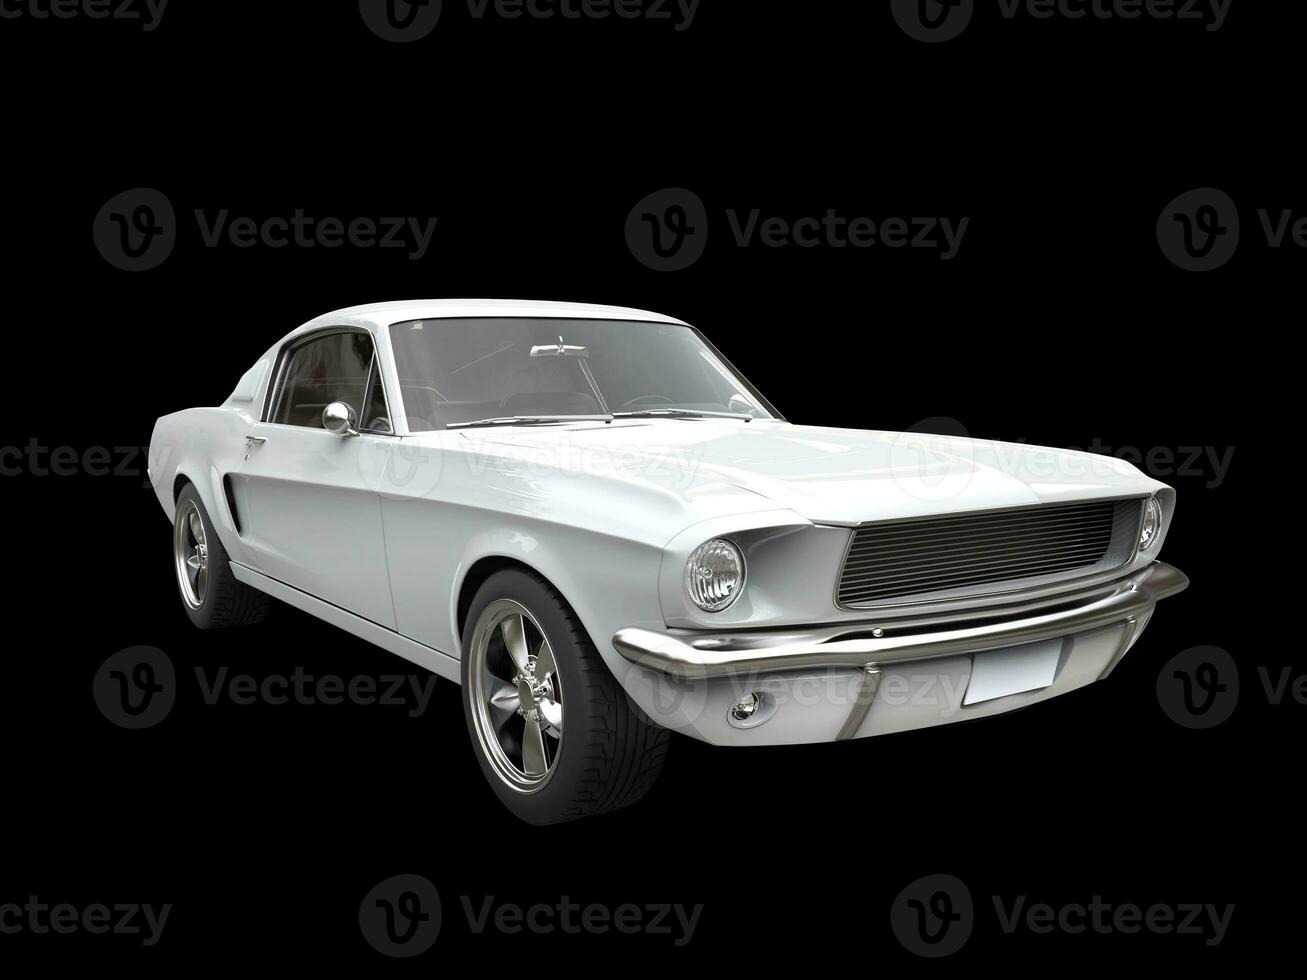 Clear white vintage American muscle car photo